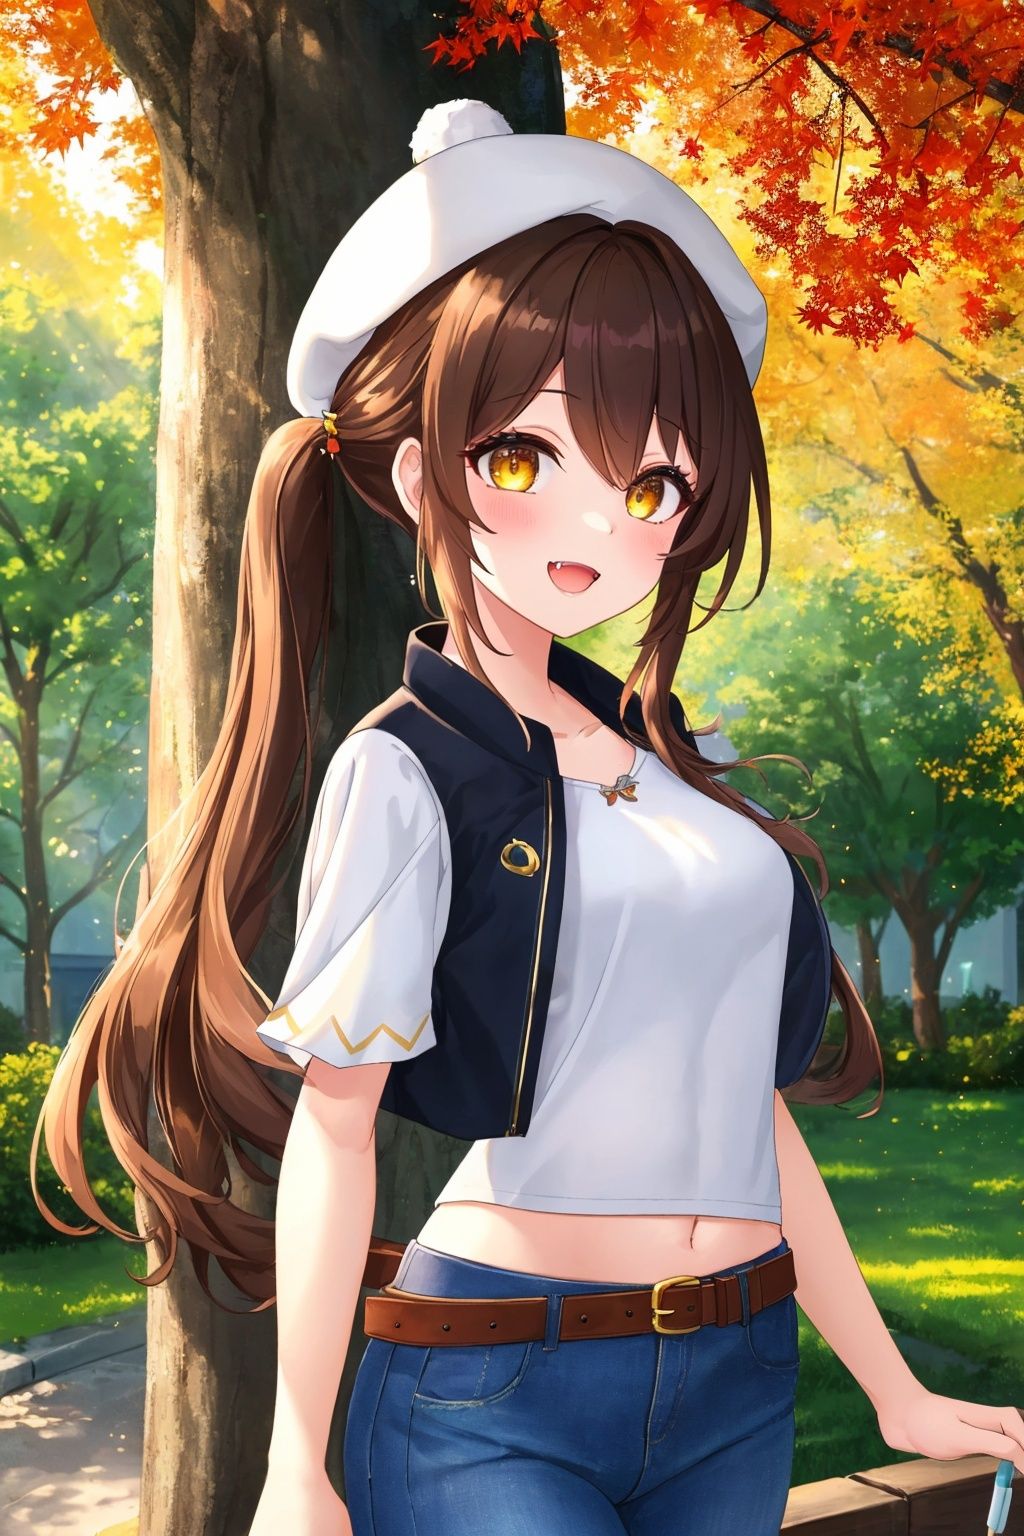  A beautiful girl with long brown hair is standing in a park surrounded by maple trees whose leaves are changing colors for fall. The girl is wearing a flowing white dress that elegantly cascades down her figure and perfectly complements the array of oranges, reds, and yellows of the maple leaves. Her dress catches the gentle breeze as she stands with one hand resting on the trunk of a tree. Her eyes are a deep brown, sparkling with a sense of wonder and admiration as she gazes upon the vibrant scenery around her. The air is crisp, and the sun's rays are shining through the trees, casting a warm light on the girl, highlighting her natural beauty. The scenery is exquisite, with the soft rustling of the leaves creating a peaceful and calming atmosphere. The girl's dress is made of a light, airy fabric that floats in the breeze, and the warm colors of the leaves create a perfect harmony with the white of her dress. The image is of the highest quality and resolution, with vivid colors and sharp focus. The style is a mix of photography and painting, with an emphasis on realism and photorealism. The color tones are warm and inviting, with a light haze that adds a touch of romanticism to the scene. The lighting is natural, with the sun shining from behind the trees, casting a soft, warm glow on the girl and the surrounding area.
best quality, high resolution, distinct image, best quality, high resolution, distinct image, Original Characters, Natural Volumetric Lighting And Best Shadows, Deep Depth Of Field, Sharp Focus, Portrait Of Stunningly Beautiful Petite Girl, Soft Delicate Beautiful Attractive Face With Alluring Yellow Eyes, Lovely Small Breasts, Sharp Eyeliner, Seductive Smiling, Open Mouth With Cute Fangs Out, Windswept Disheveled Brown Hair, Thick Layered Medium Twintail Hairstyles, Blush Eyeshadow With Thick Eyelashes, Parted Lips, Applejack Hat, Oversized Pop-Art Jacket, Slim Waist With Open Cute Navel, Denim Jeans Pants With Buckle Belt, (Messy Painted Body:1.05), (Holding Spray Paint Can:1.1), (Graffiti Murals Wall Background:1.15), (Standing On Narrow City Streets Crossword:1.2), (Highest Quality, Amazing Details:1.4), Masterpiece, Bloom, Picturesque, Brilliant Colorful Paintings
